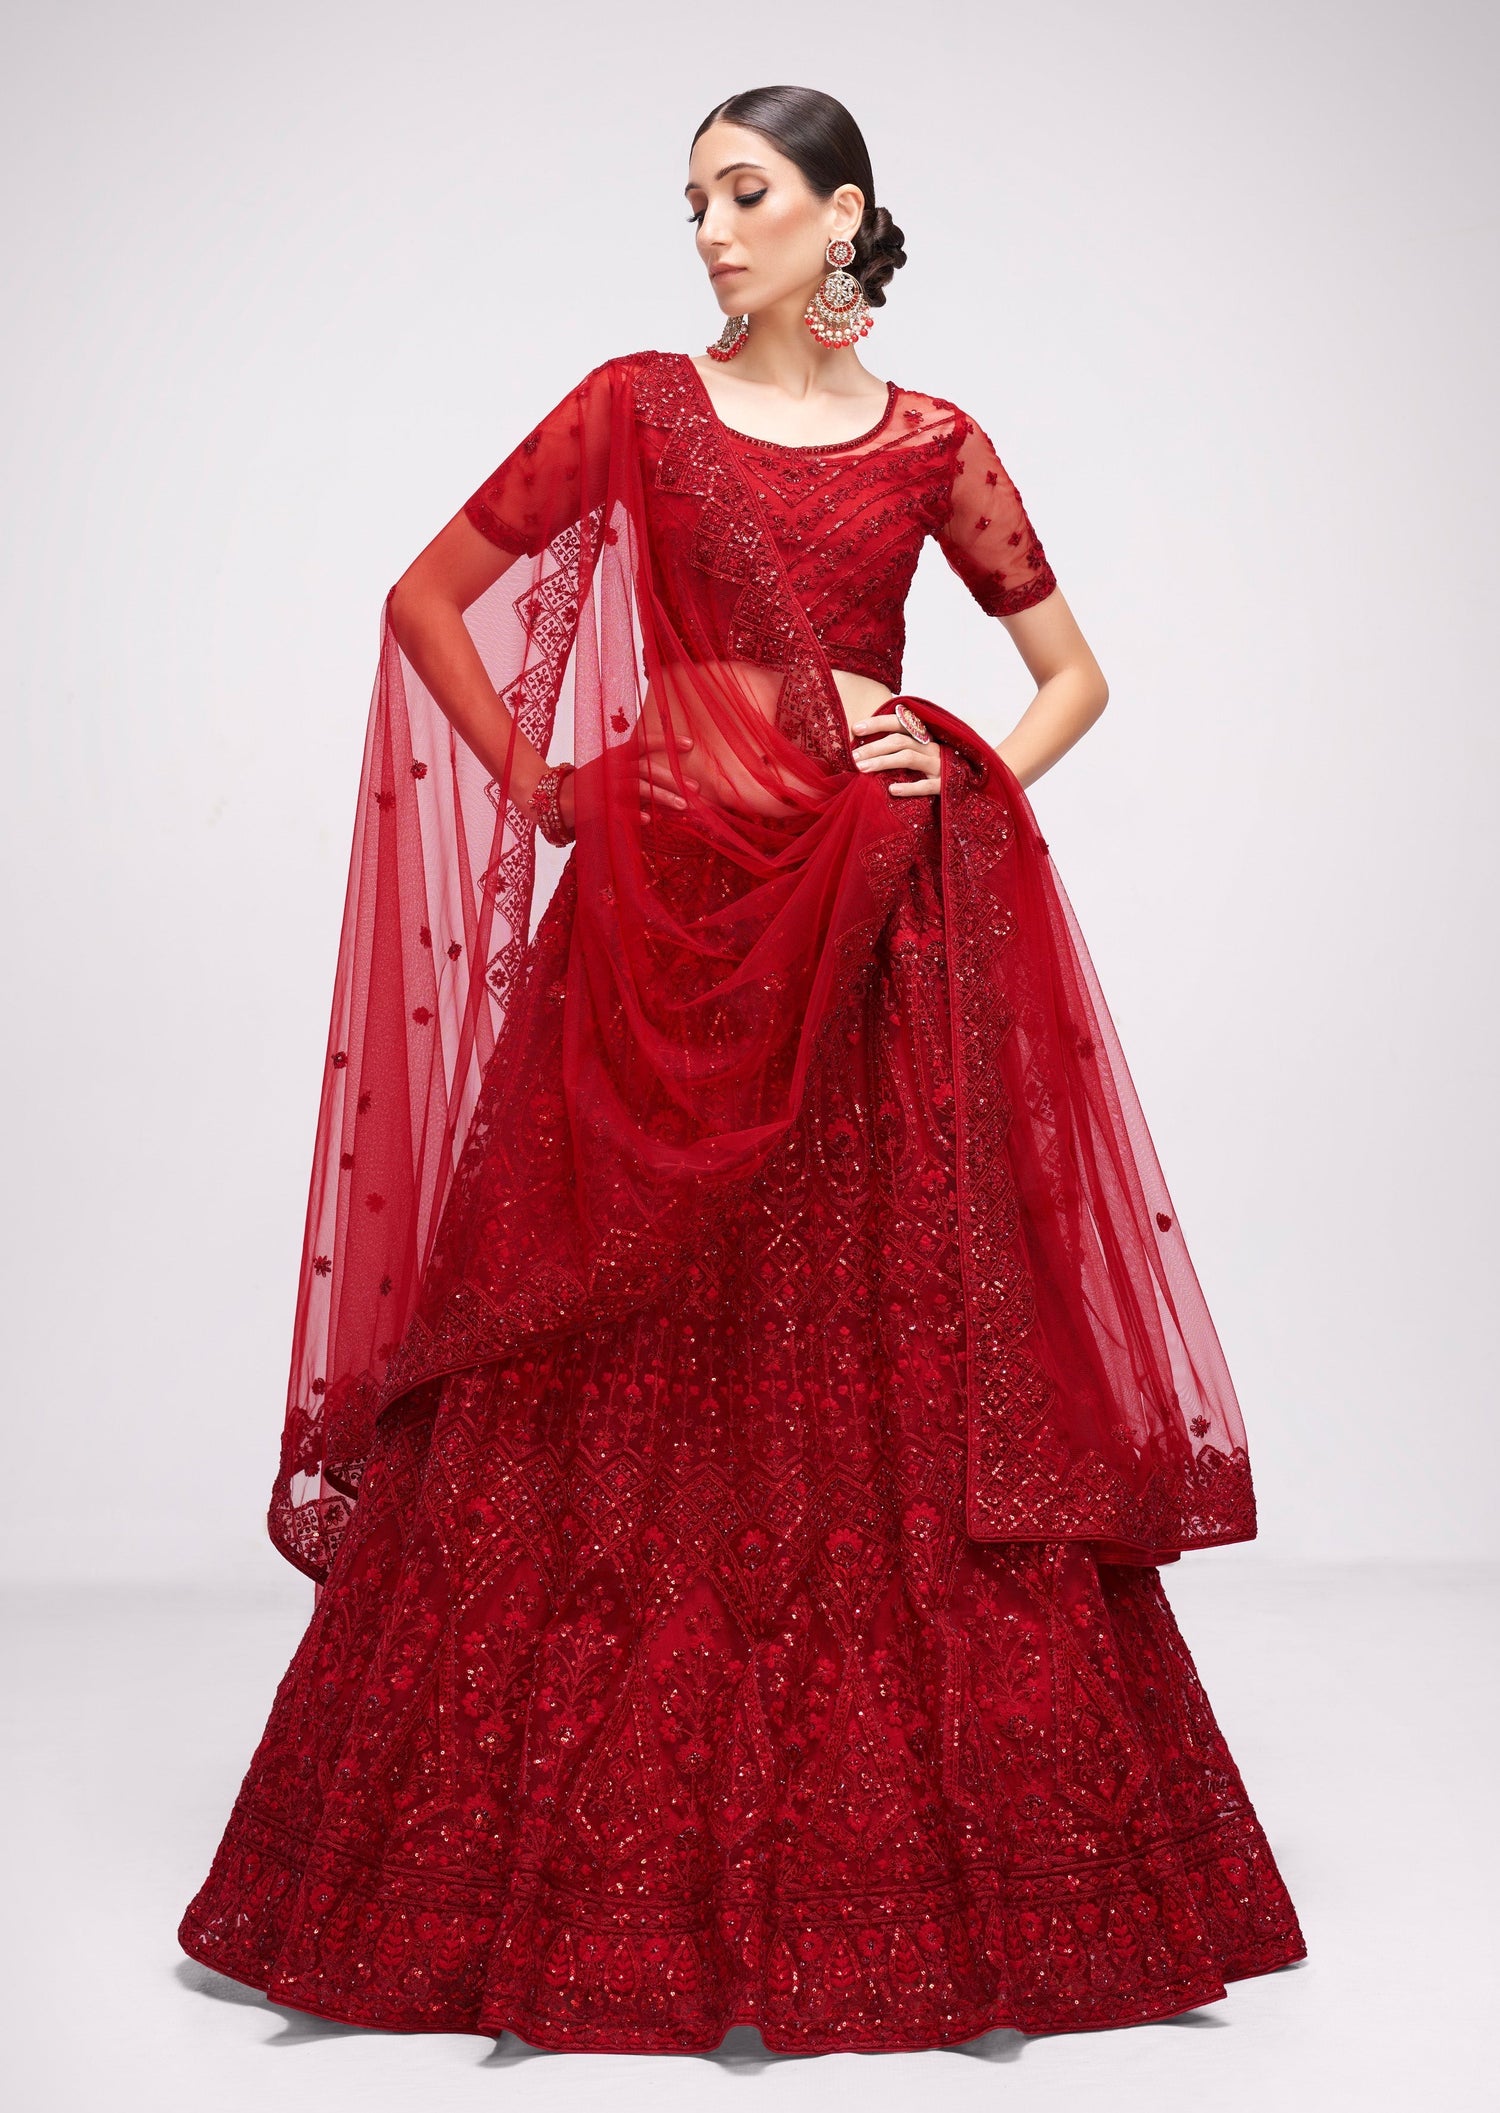 Western Gowns Online| Latest Evening Gowns| Online Gown Shopping in India -  Luxefashion Internet Inc